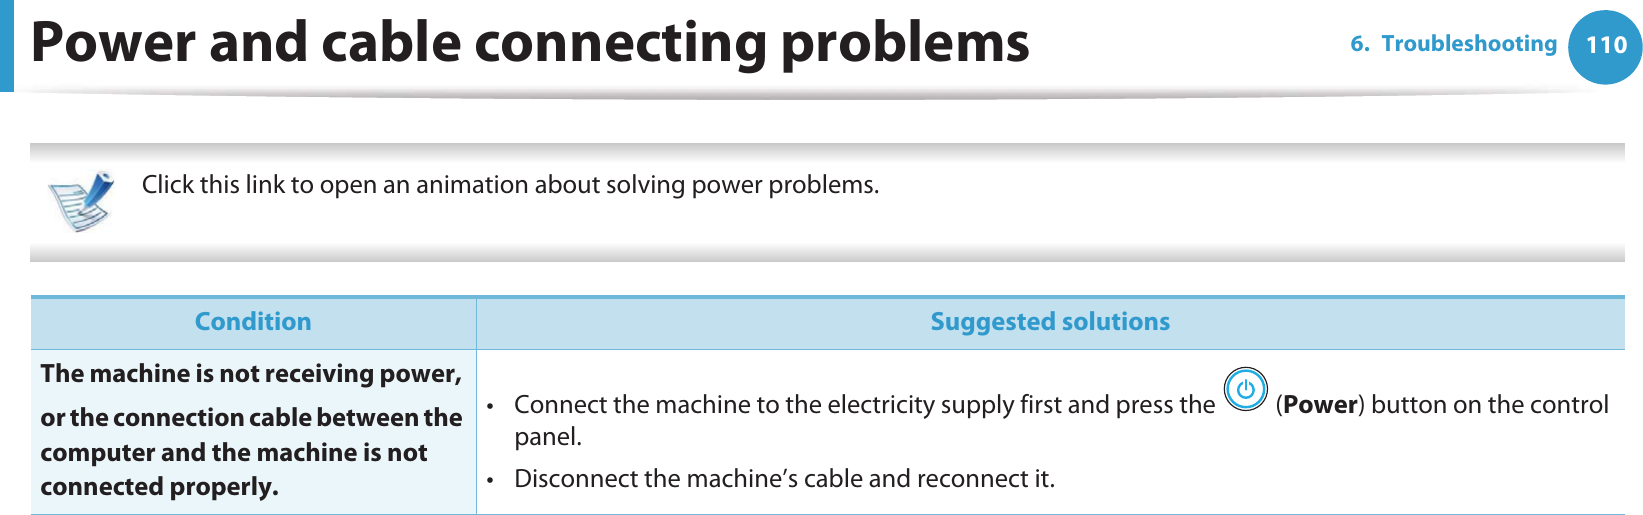 1106. TroubleshootingPower and cable connecting problems Click this link to open an animation about solving power problems.   Condition Suggested solutionsThe machine is not receiving power, or the connection cable between the computer and the machine is not connected properly.• Connect the machine to the electricity supply first and press the   (Power) button on the control panel.• Disconnect the machine’s cable and reconnect it.